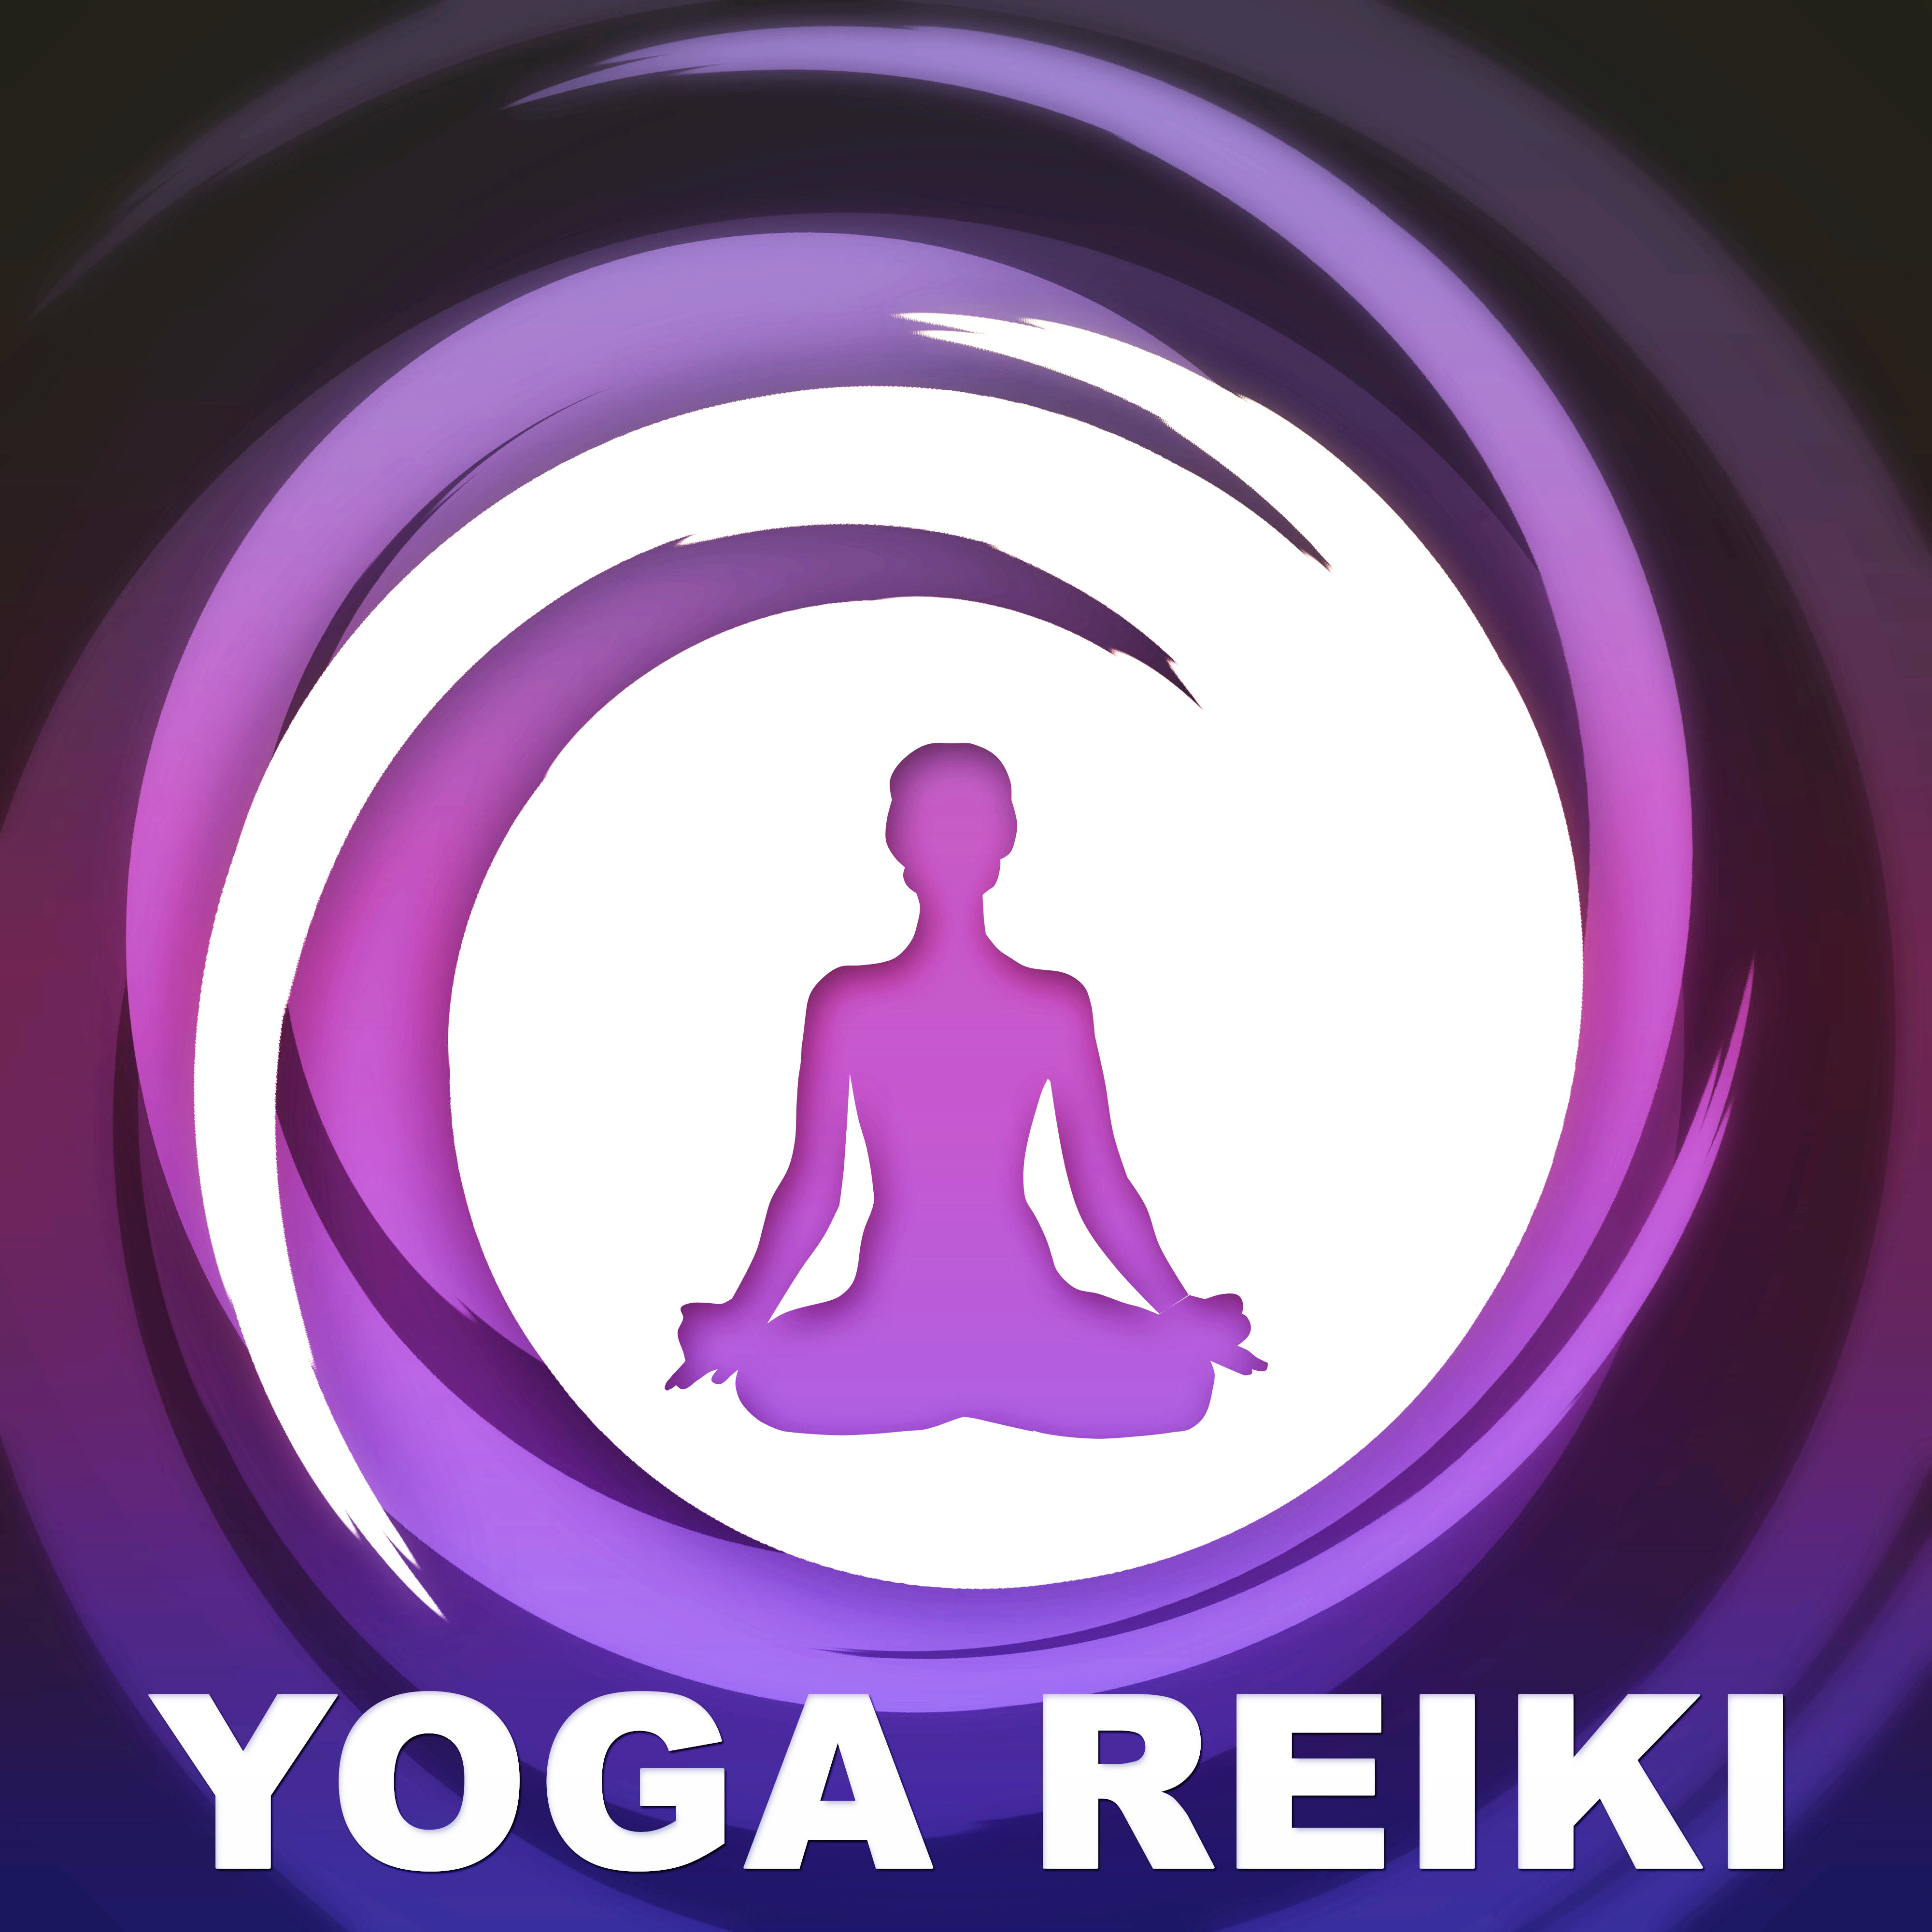 Yoga Reiki – Most Gentle Sounds for Practise Yoga Meditation, Relax and Rest,  Pure Mind and Enjoy Yourself